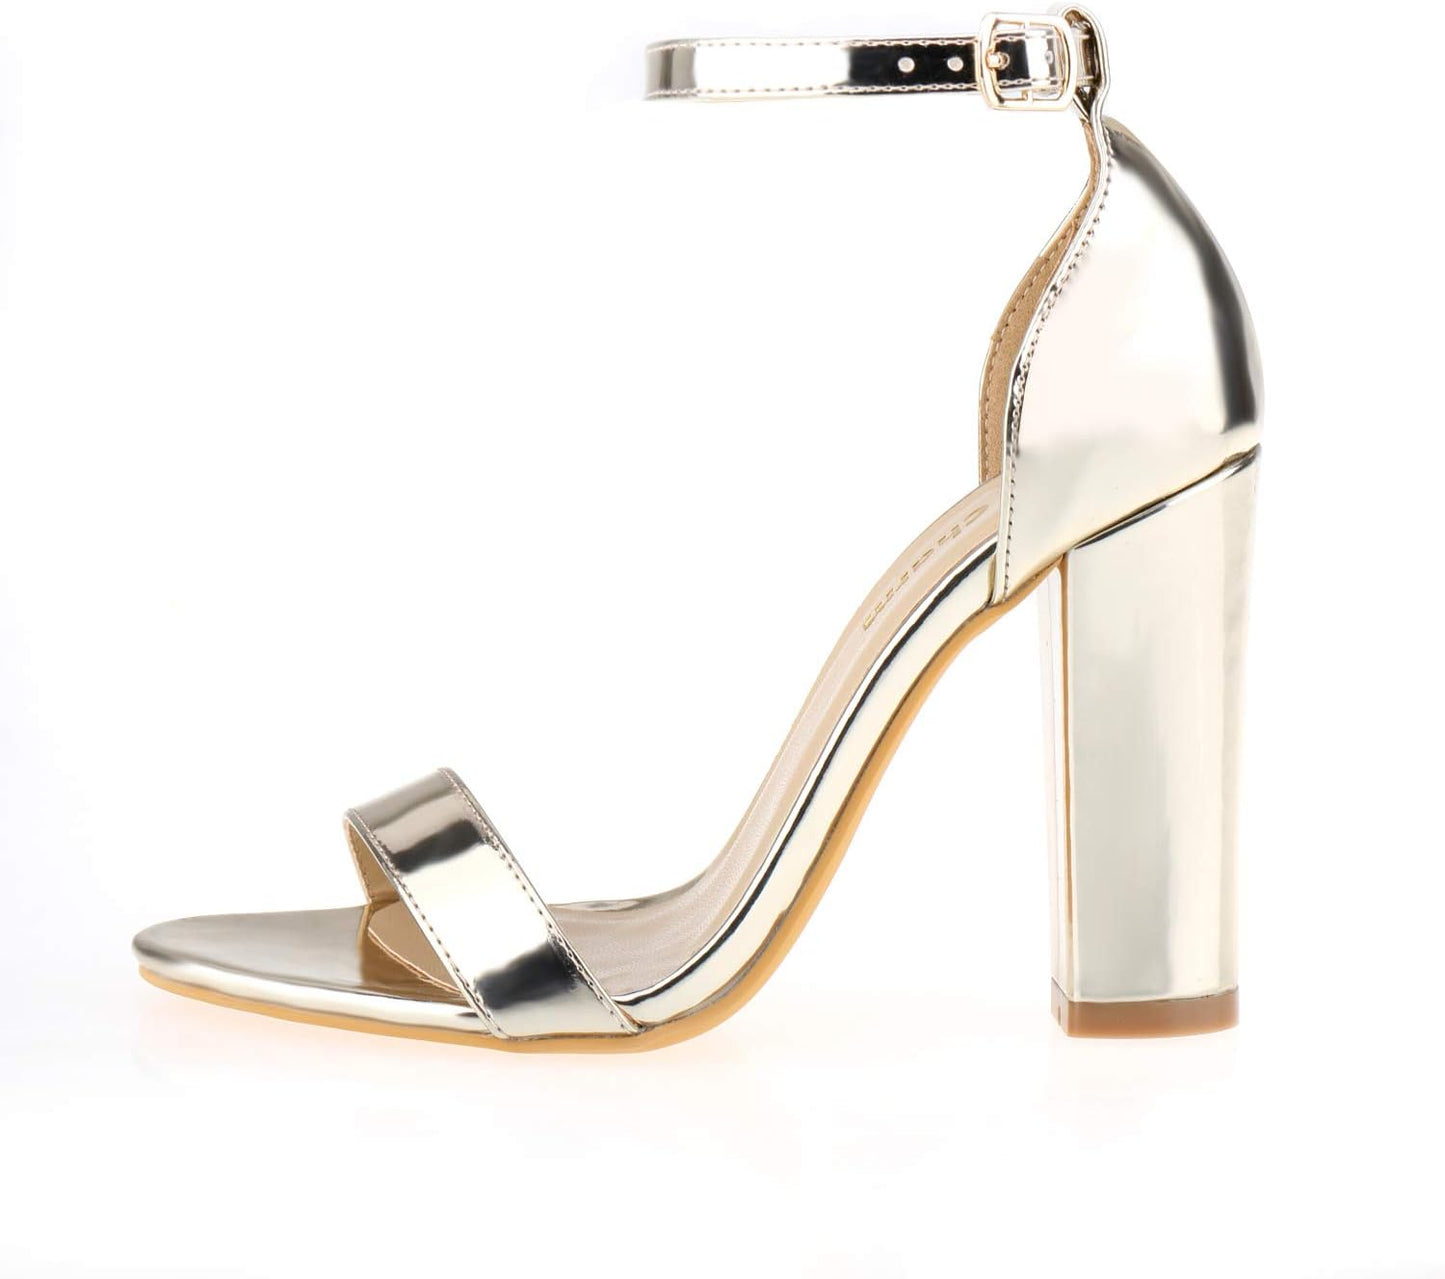 "Stylish and Elegant Women'S Chunky Block Heel Sandals - Perfect for Weddings, Parties, and Office Events!"